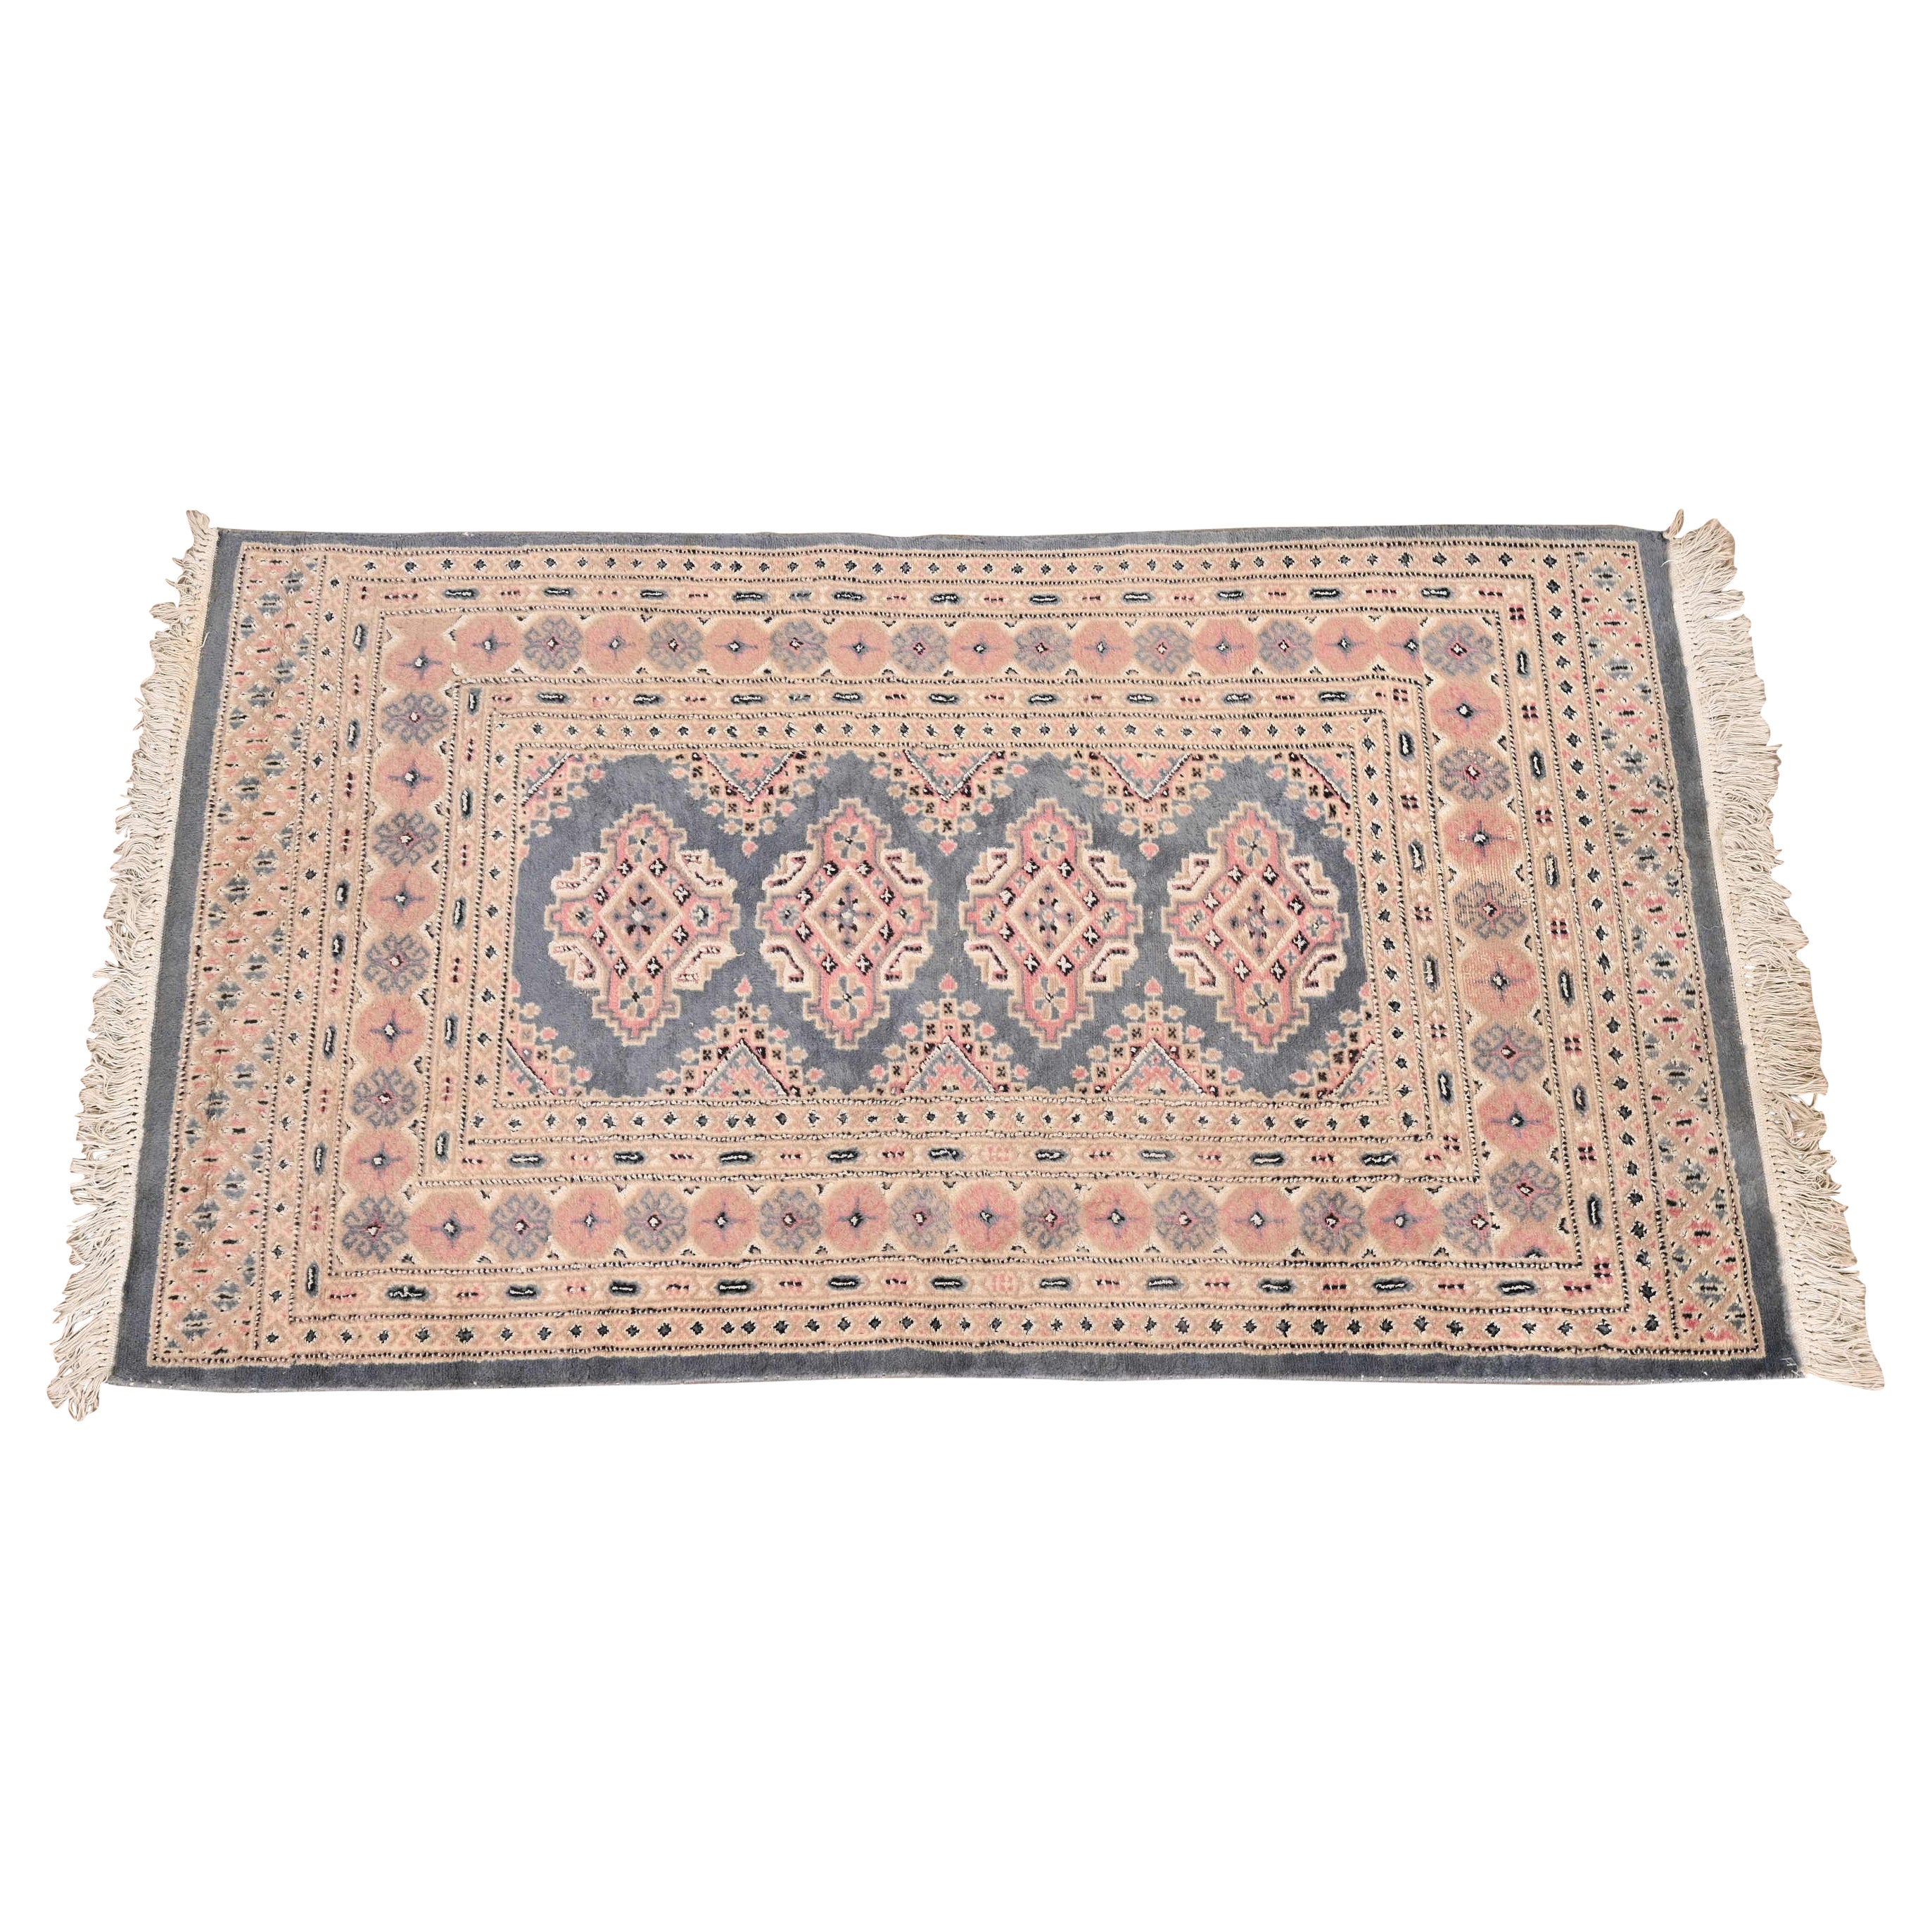 Vintage Hand-Woven Persian Bokhara Wool Rug in Light Blue, Pink, and Cream